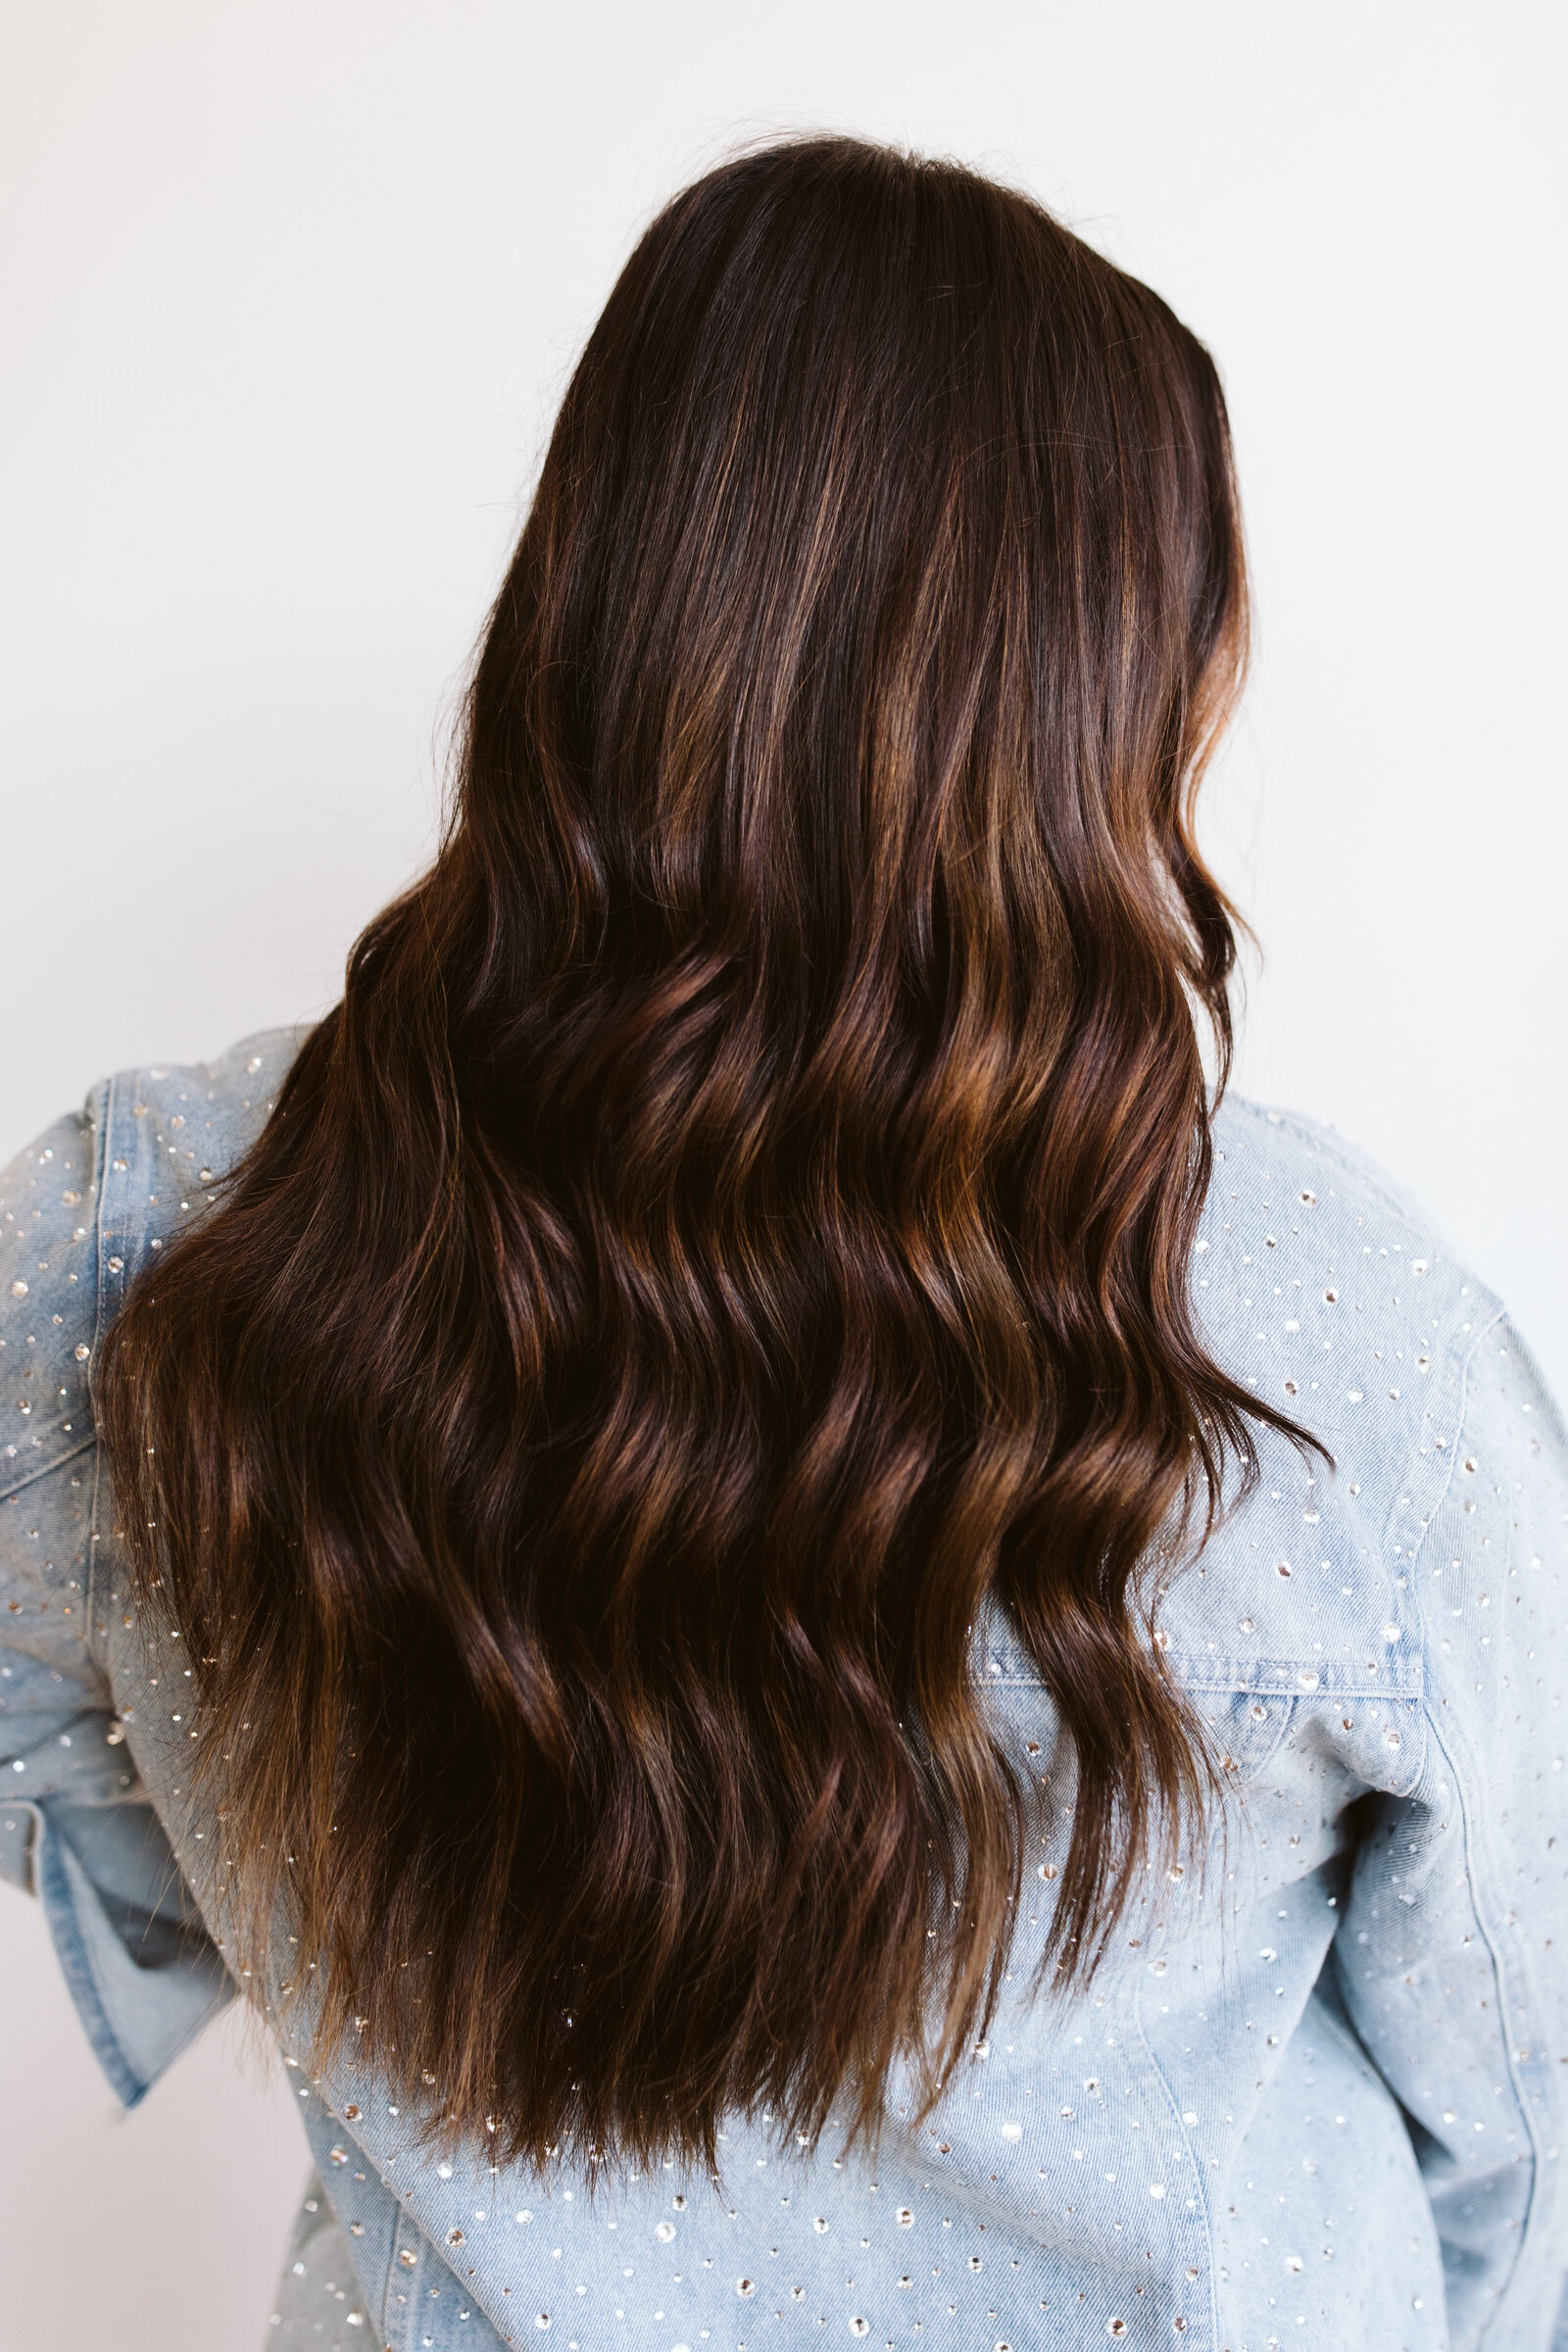 Long, wavy dark brunette hair flowing, exemplifying healthy and styled hair